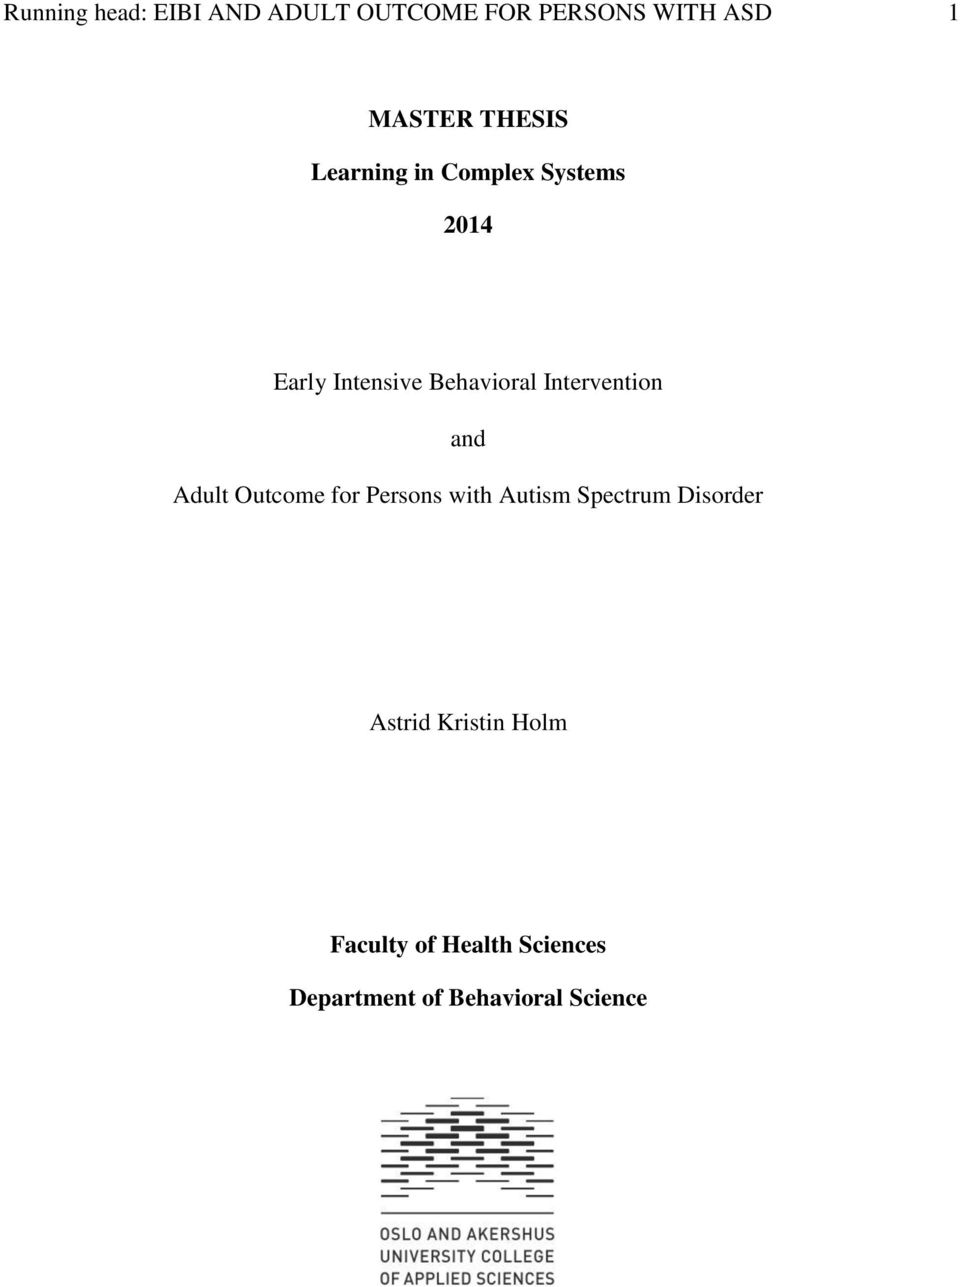 Intervention and Adult Outcome for Persons with Autism Spectrum